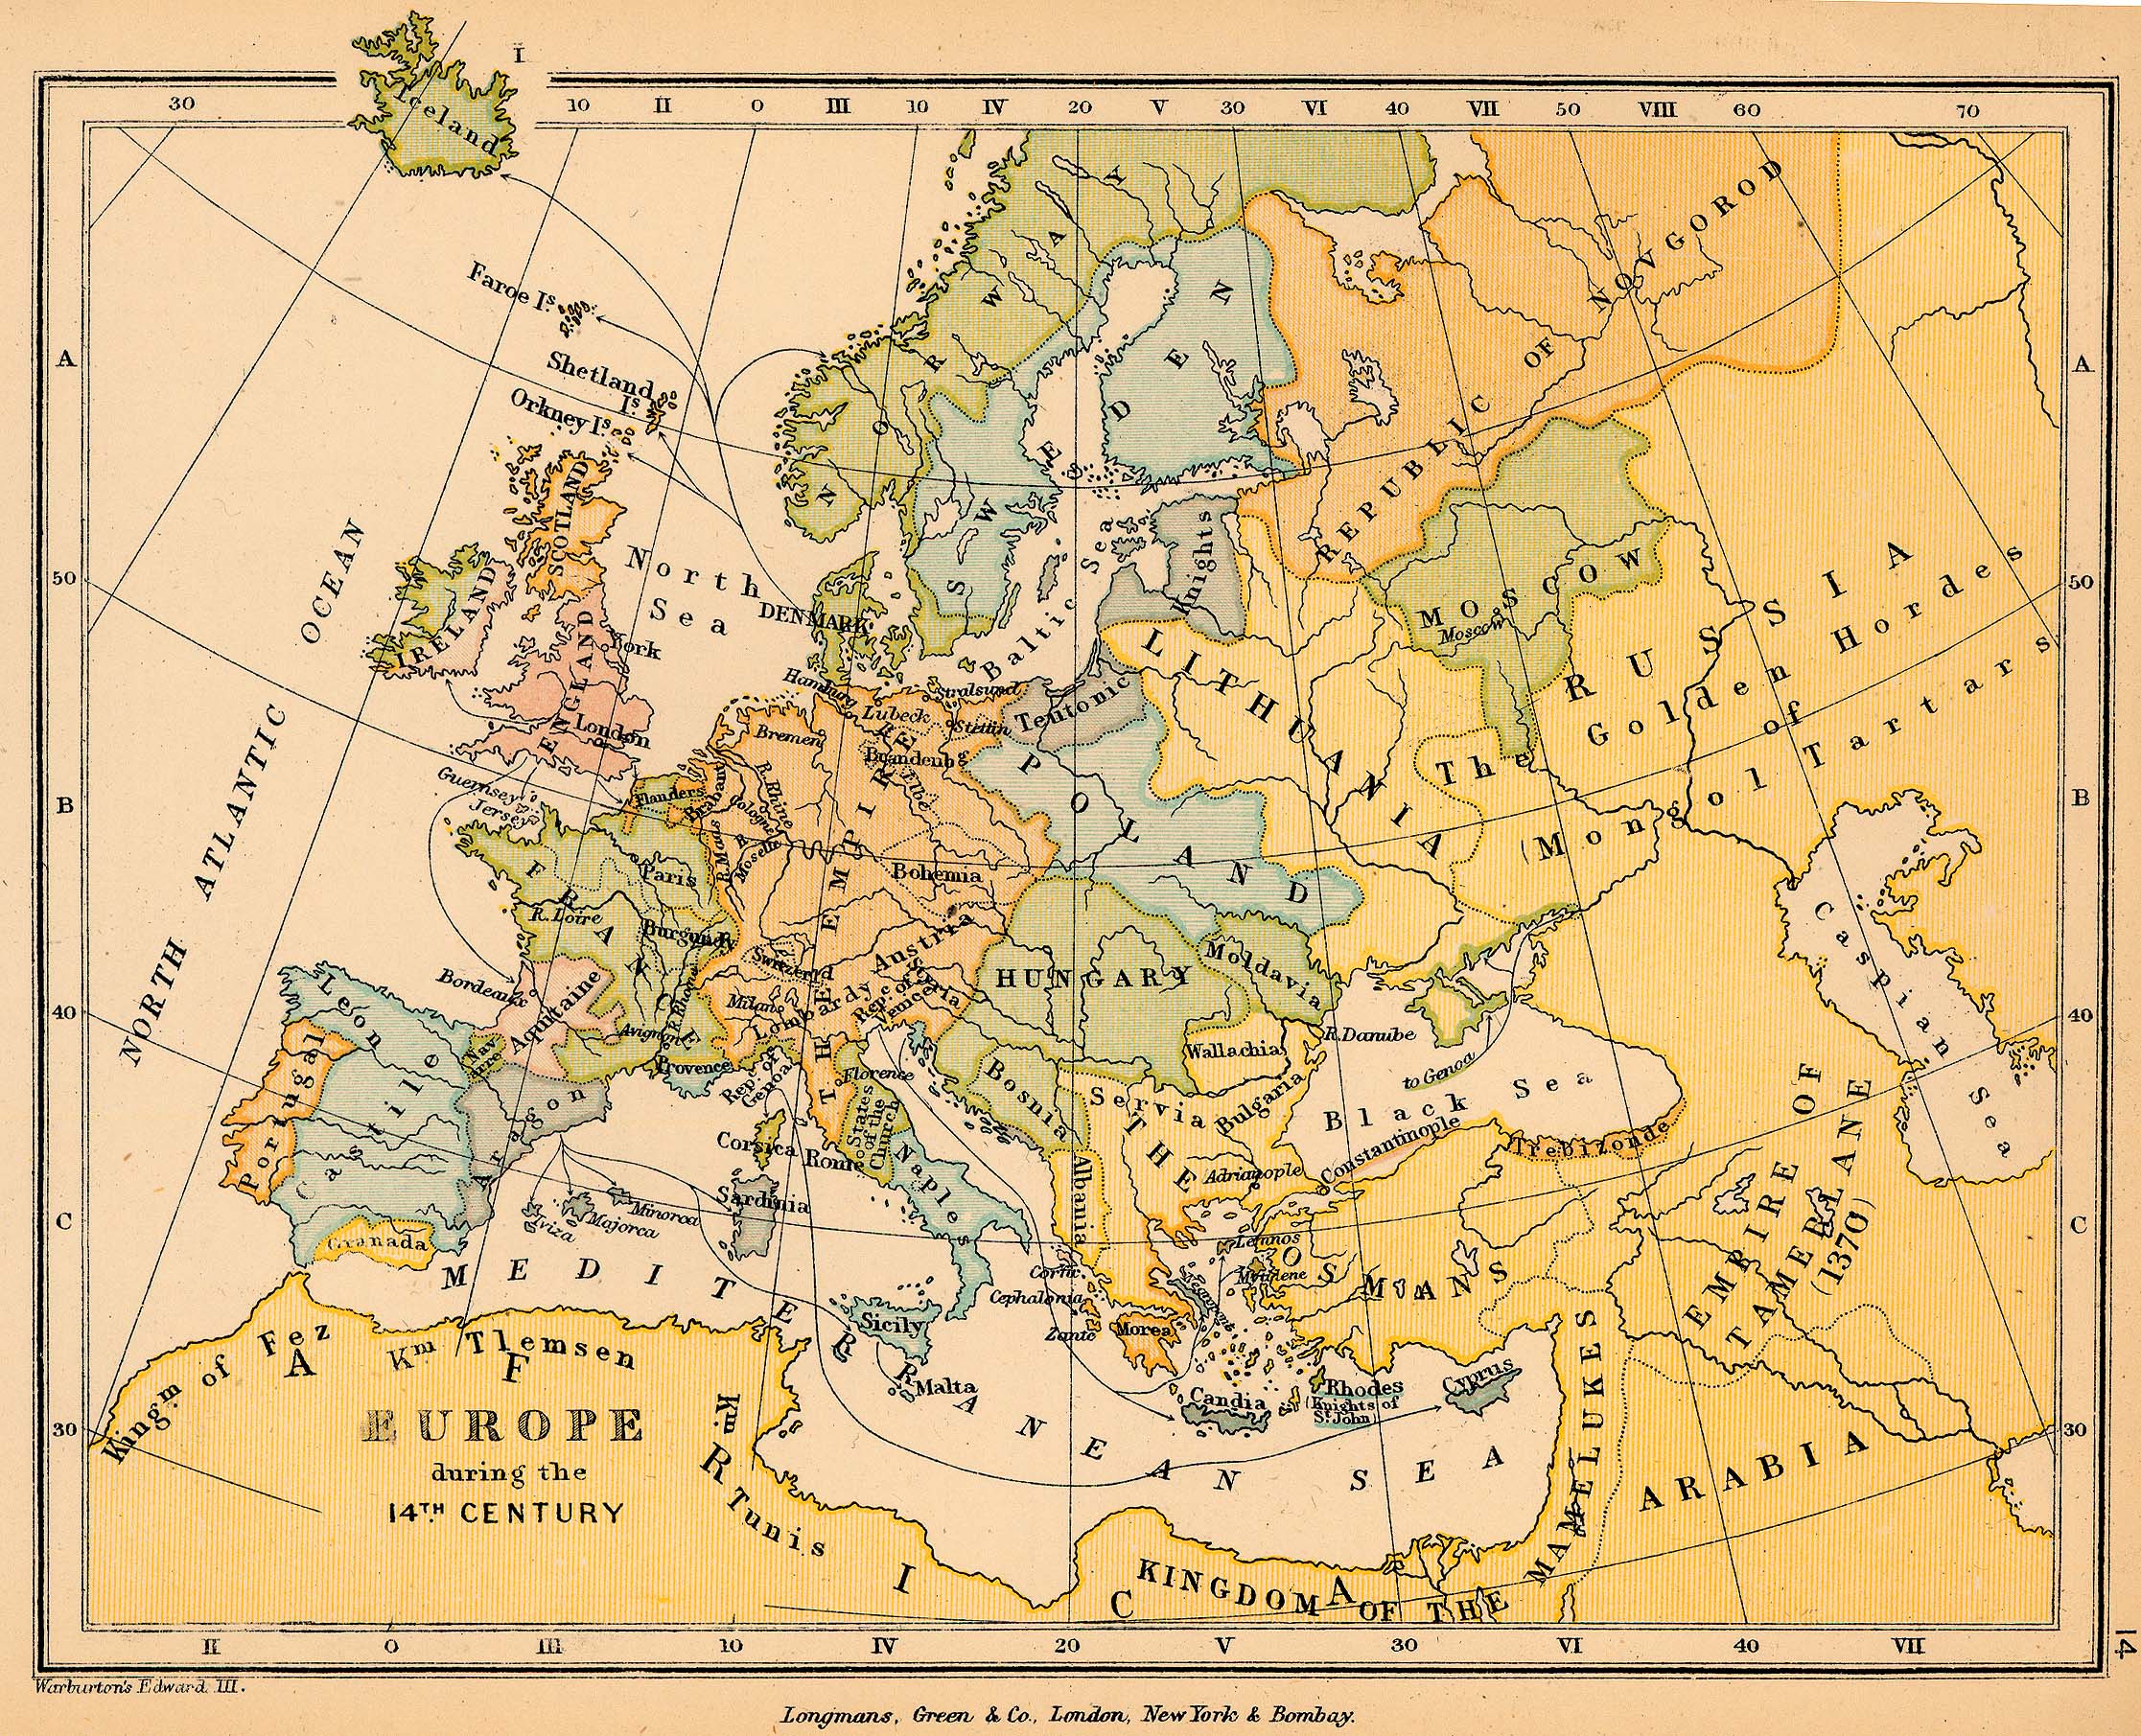 Map of Europe during the 14th Century